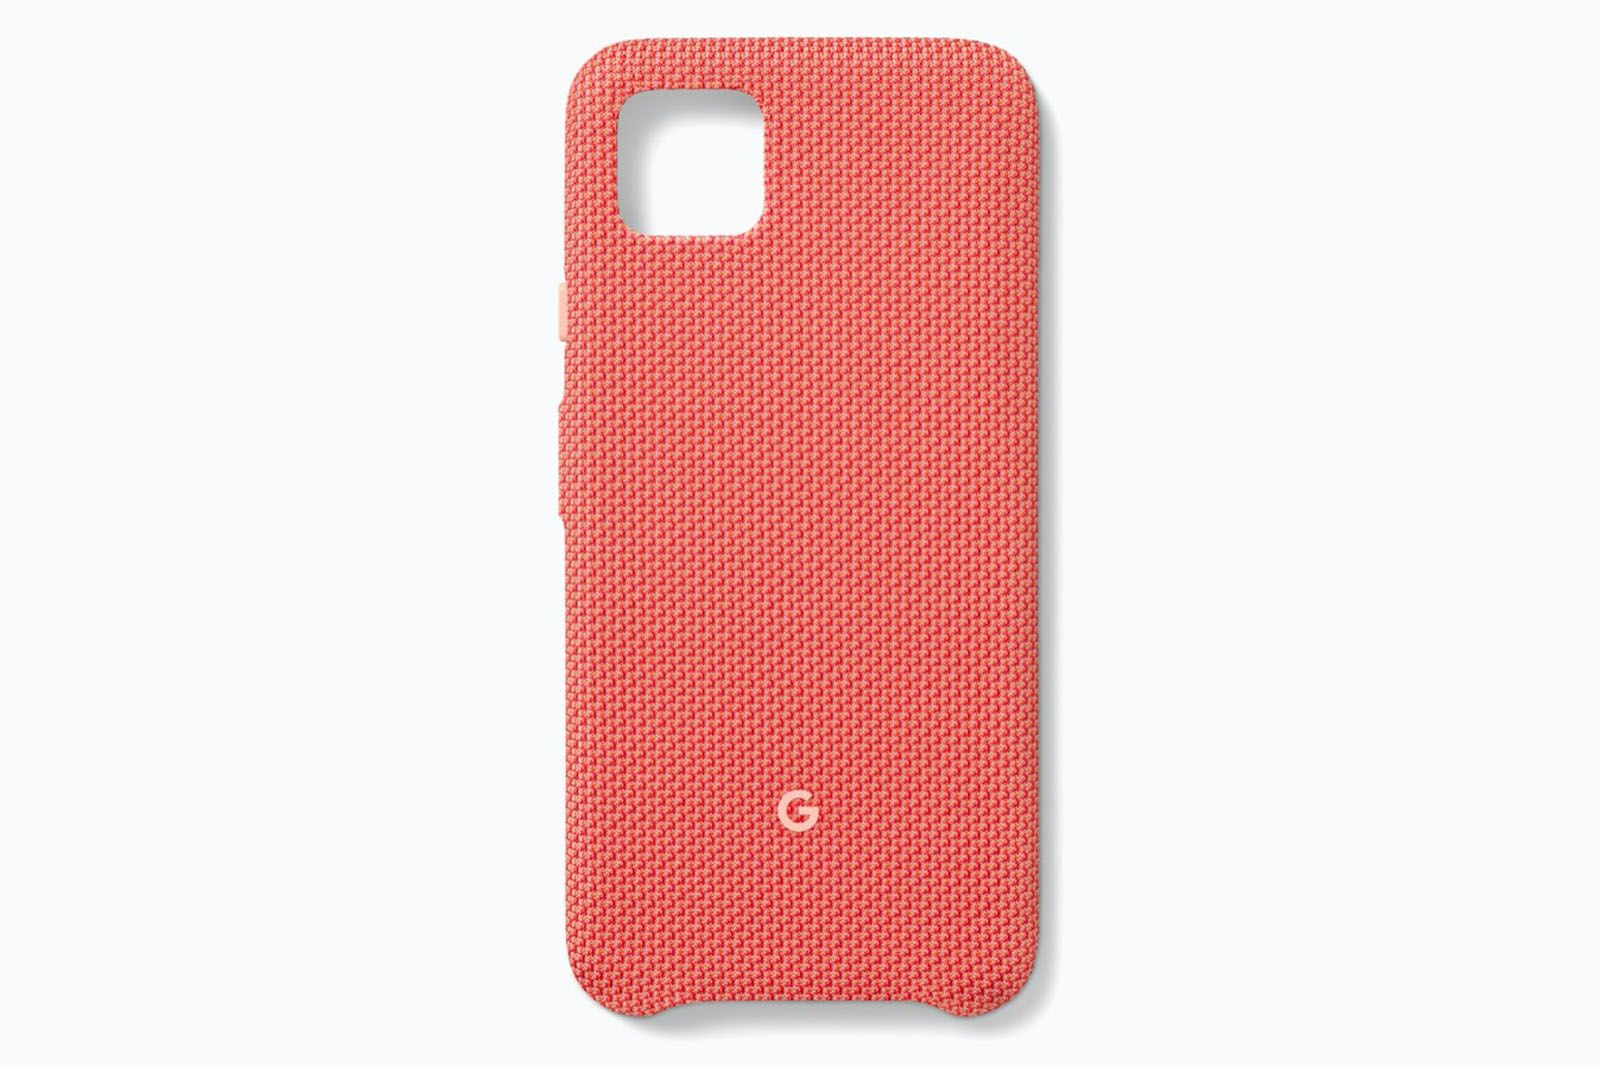 Best Pixel 4 and 4 XL cases Protect your new Google device image 2